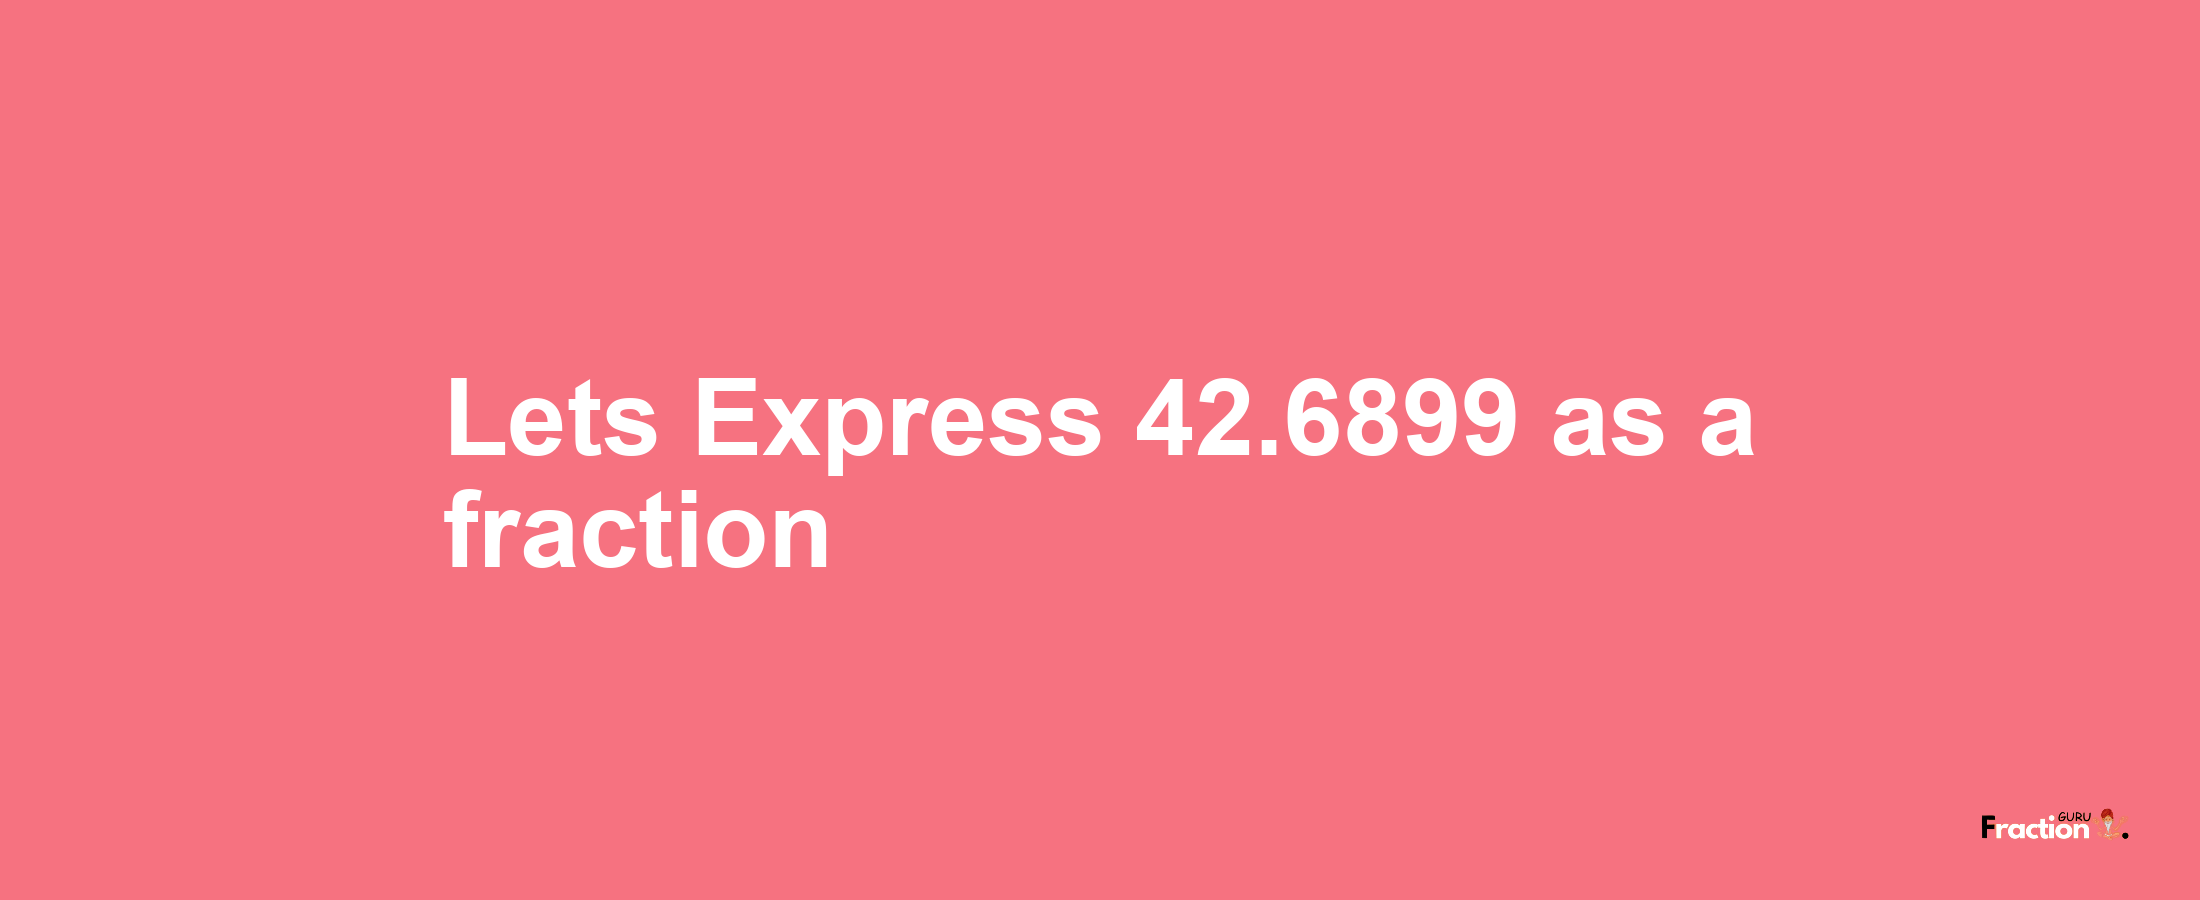 Lets Express 42.6899 as afraction